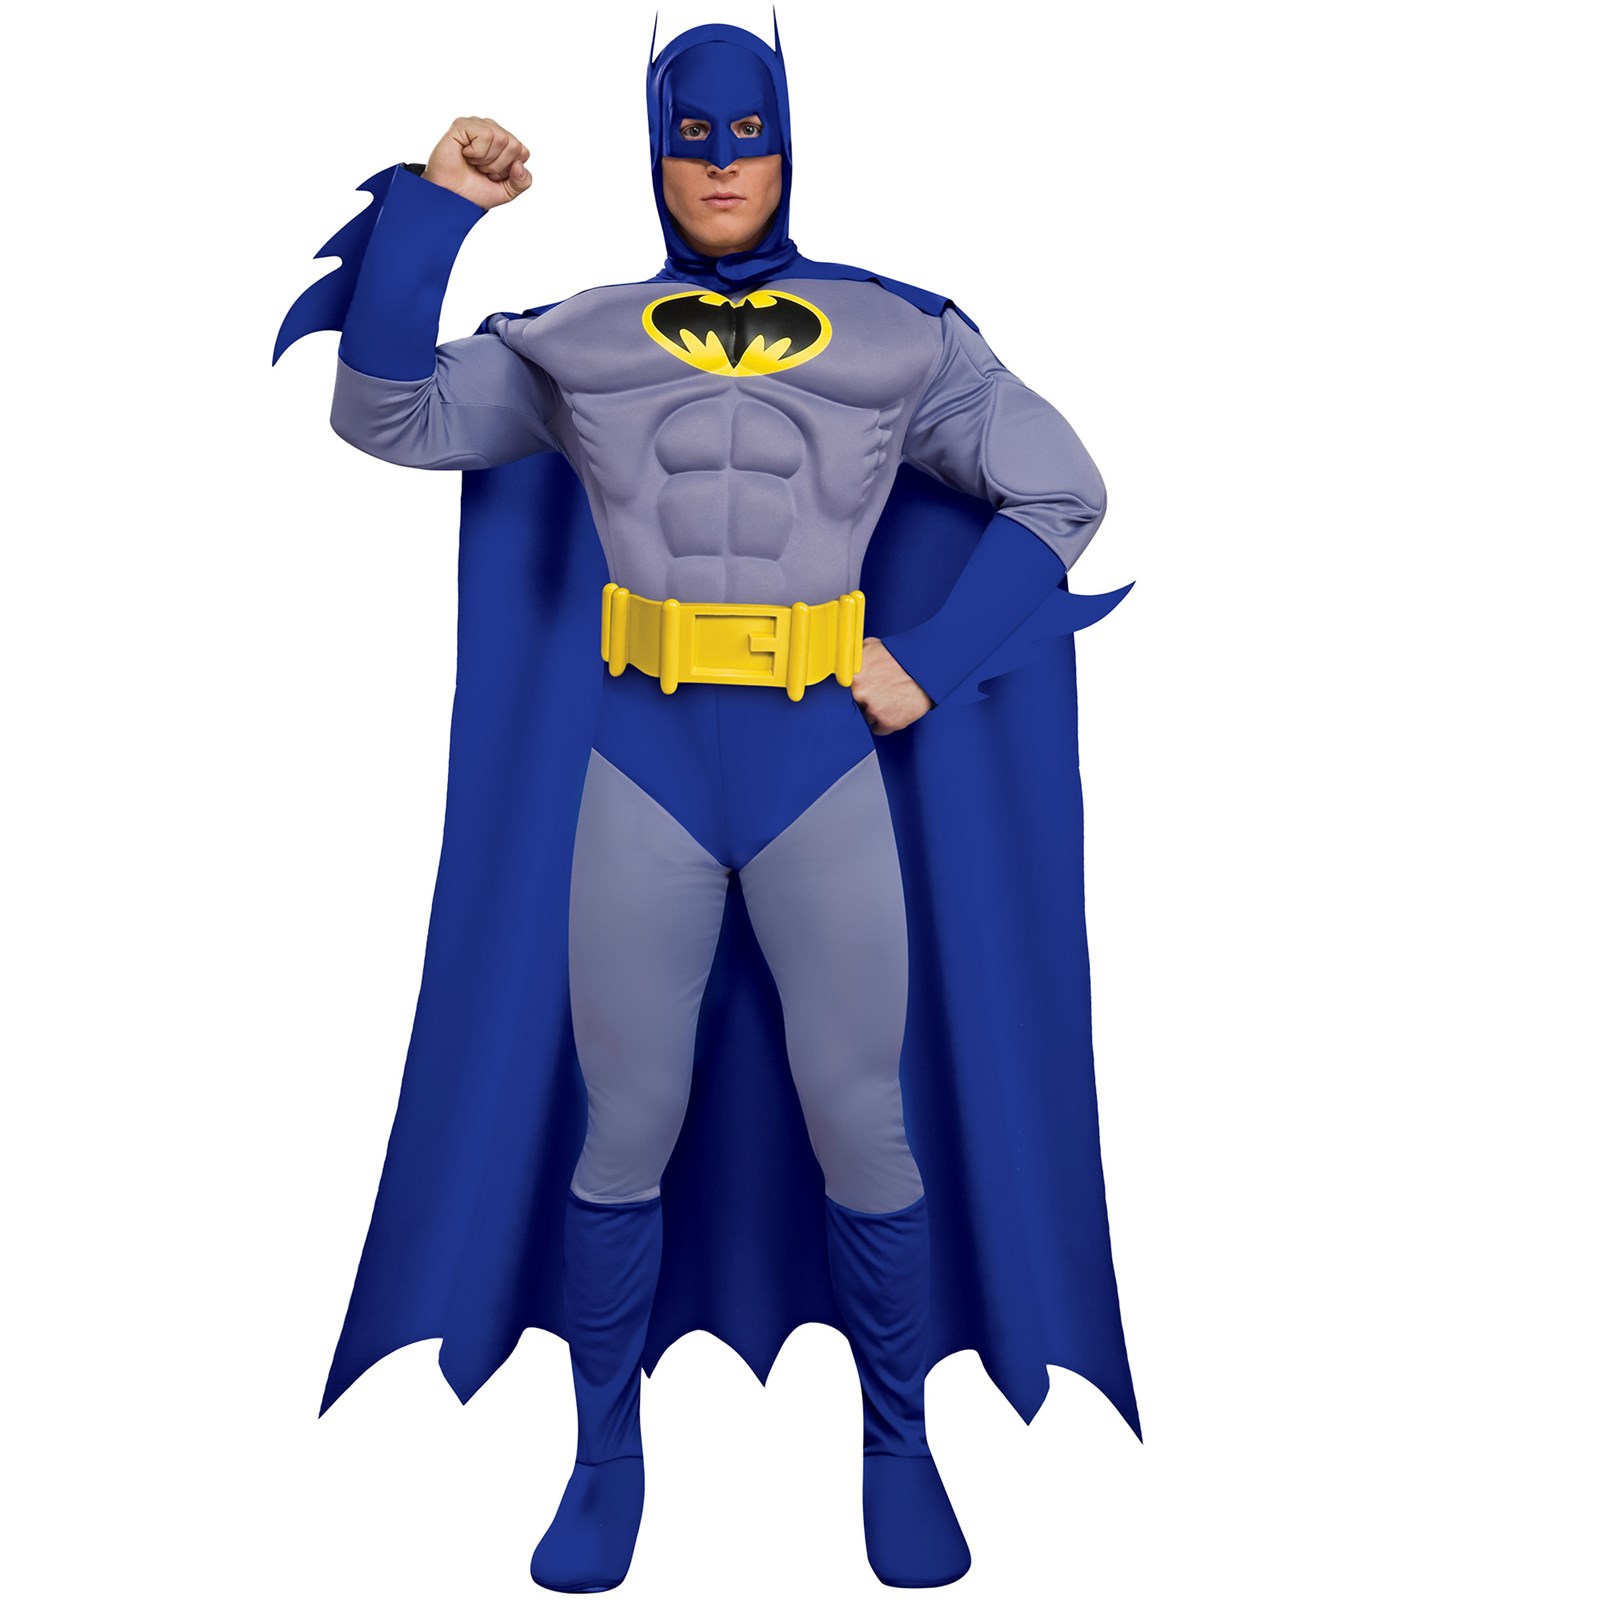 Mens Deluxe Muscle Chest Batman Costume - image 1 of 2